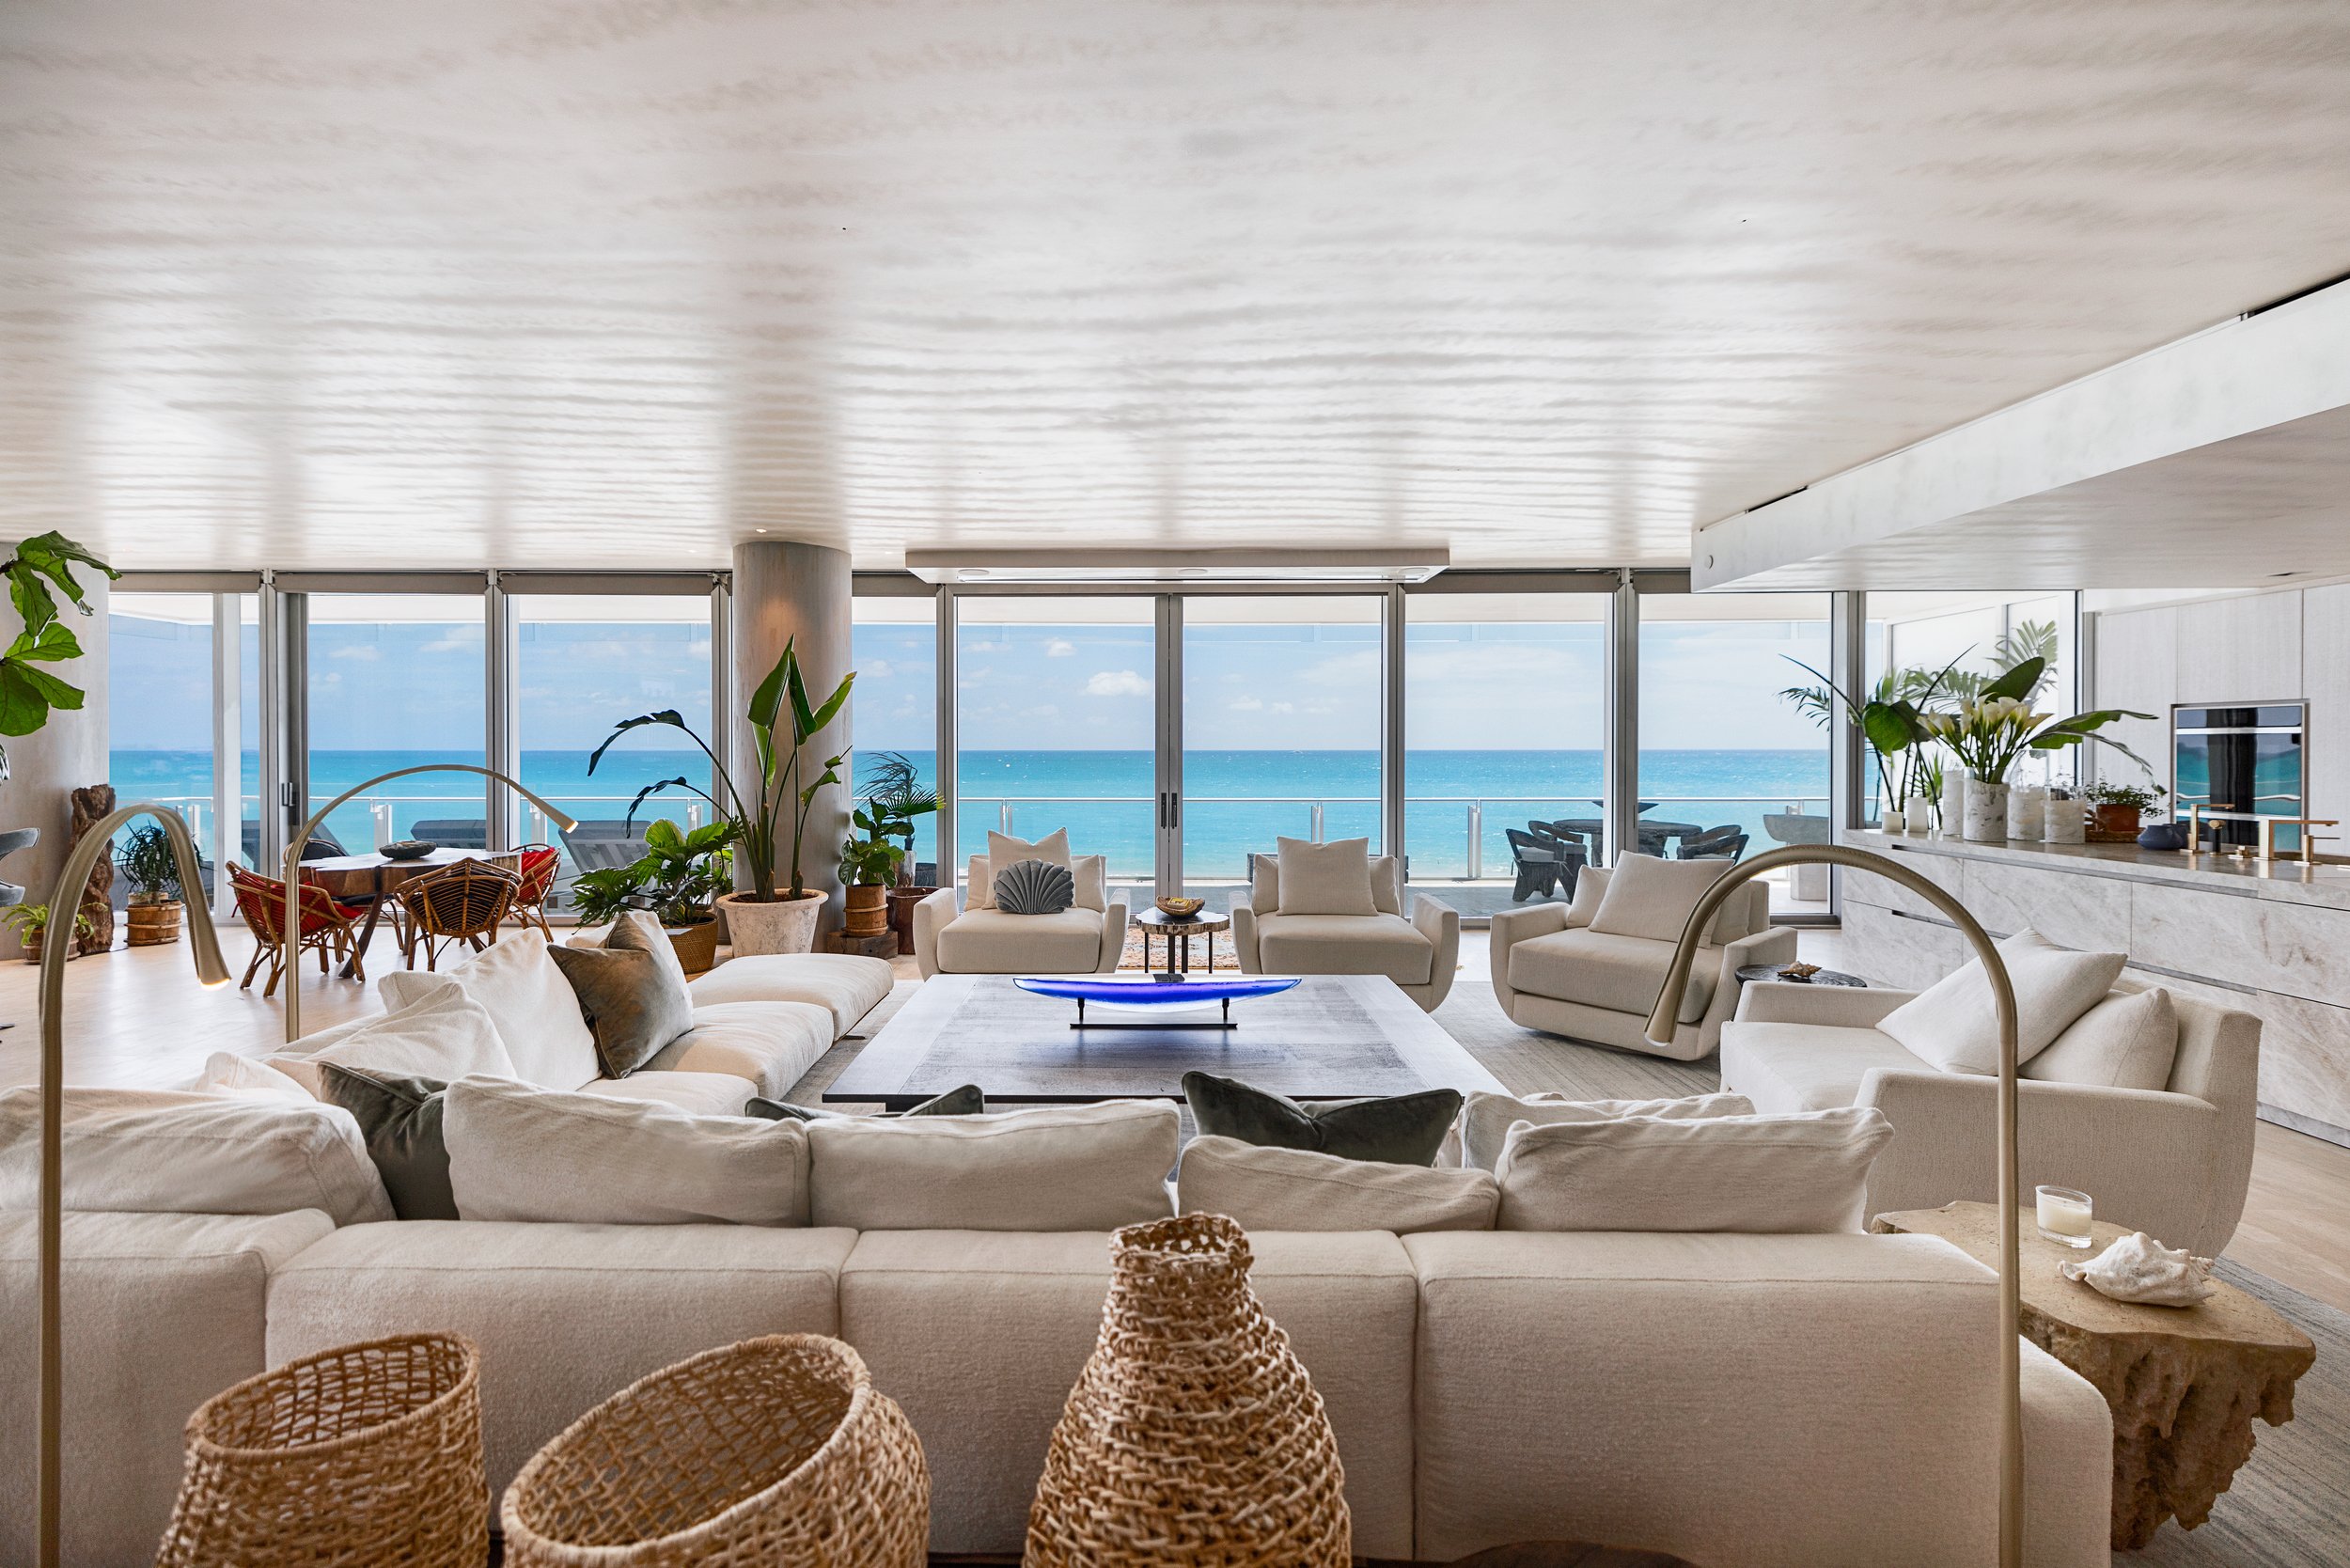 Check Out This Lavish Condo With Custom Wave Ceilings Asking $37 Million At Four Seasons at The Surf Club In Surfside 15.jpg